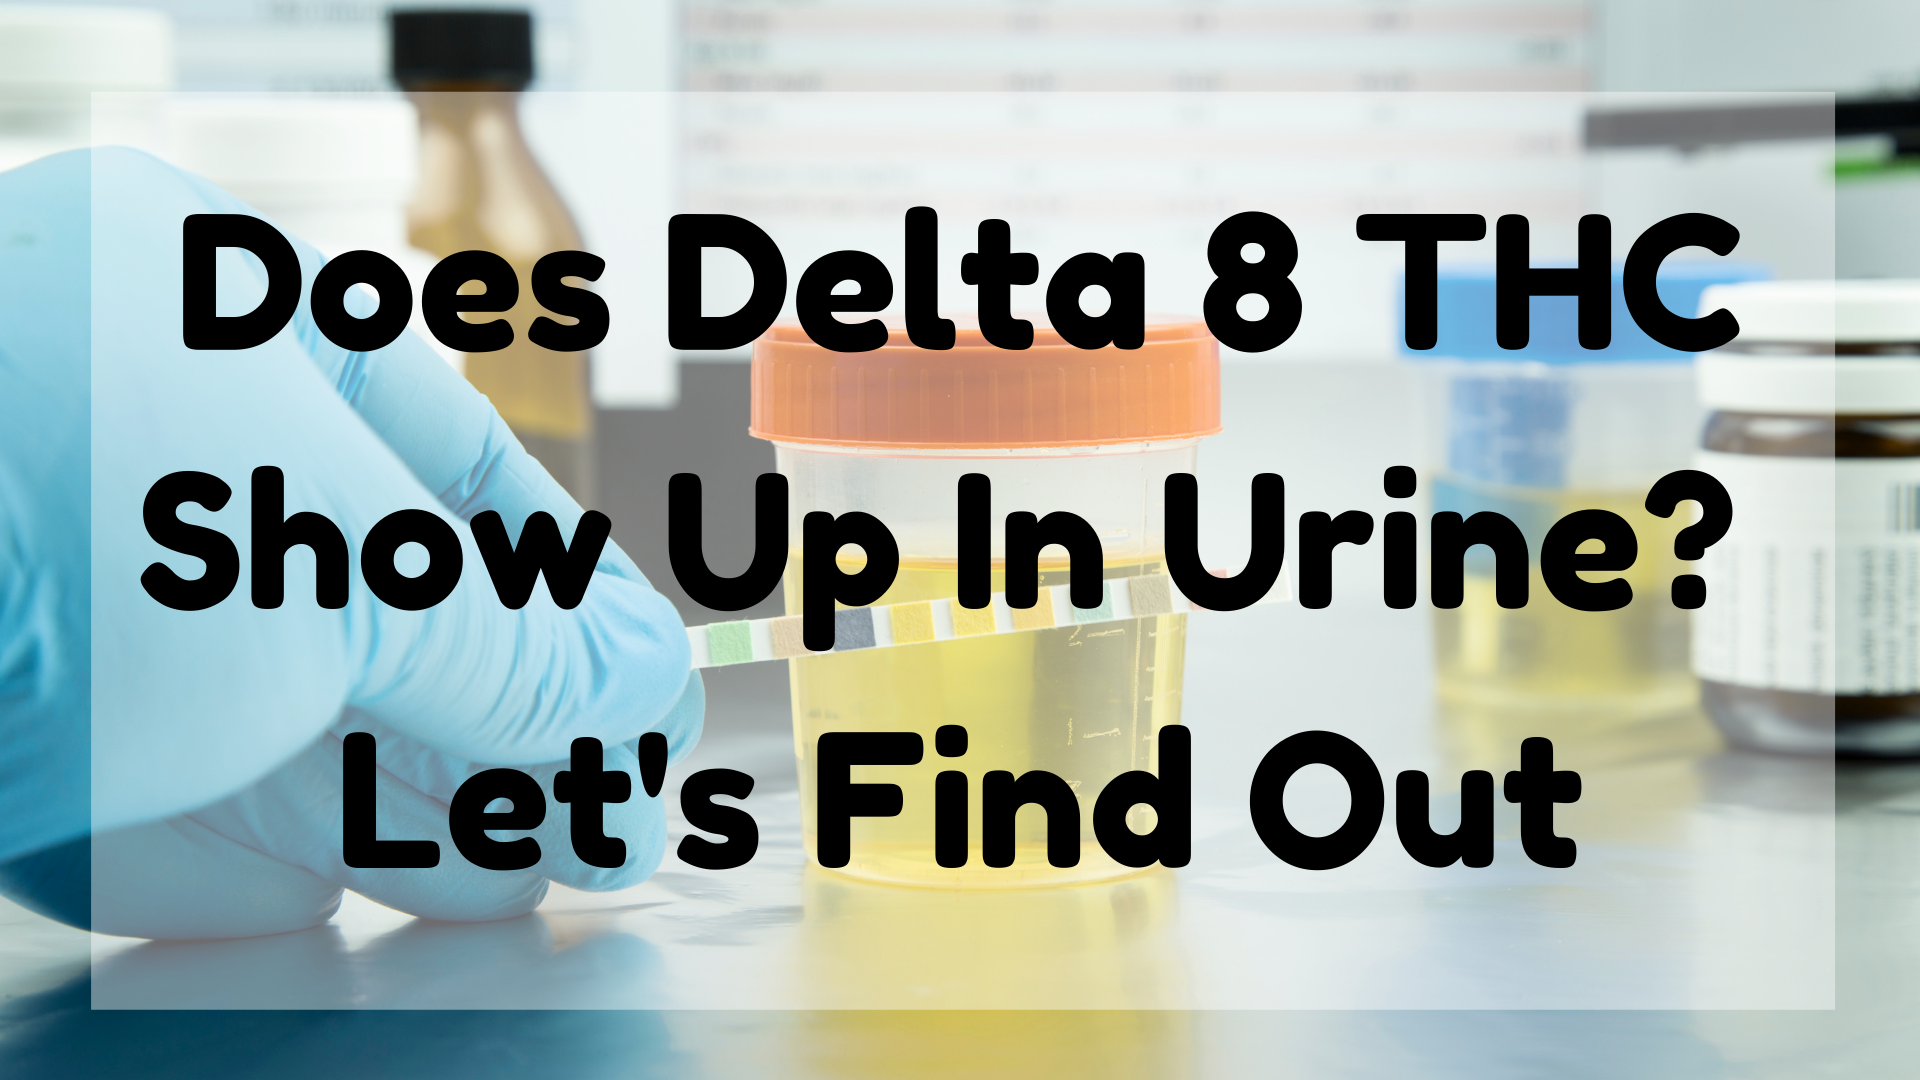 Does Delta 8 THC Show Up in Urine